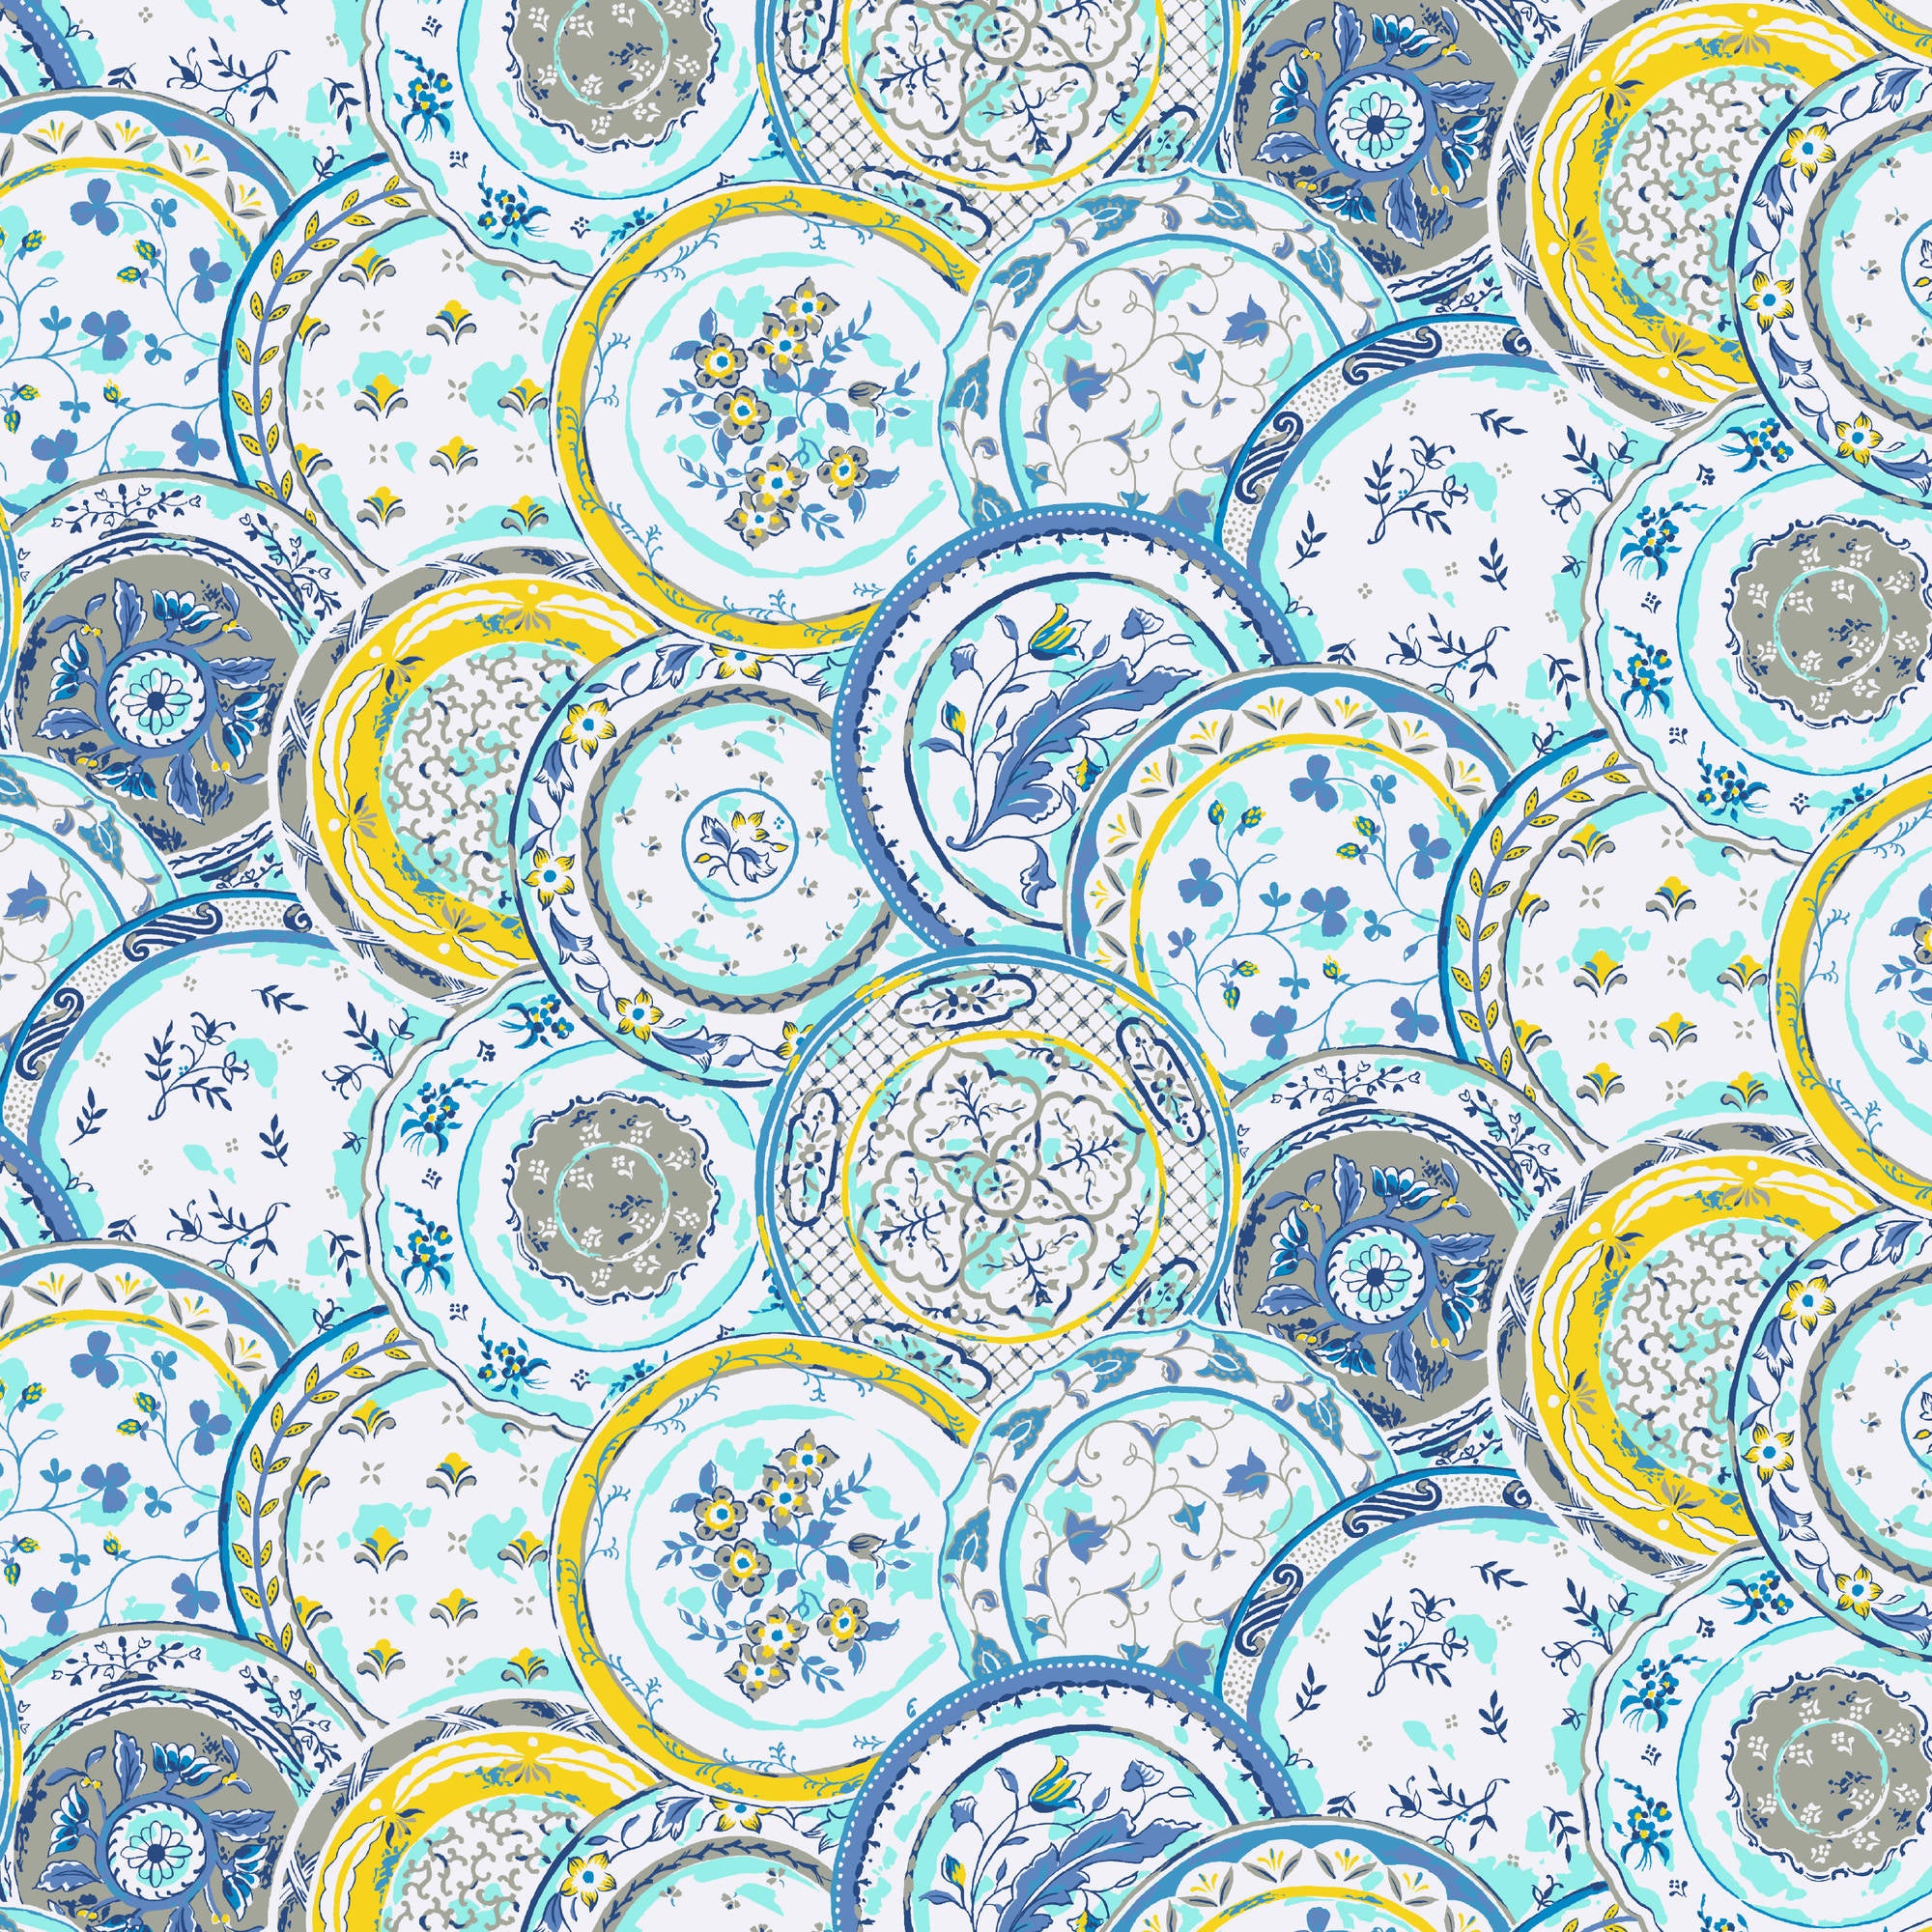 Waverly Inspirations Cotton 44" Plates Lagoon Color Sewing Fabric by the Yard